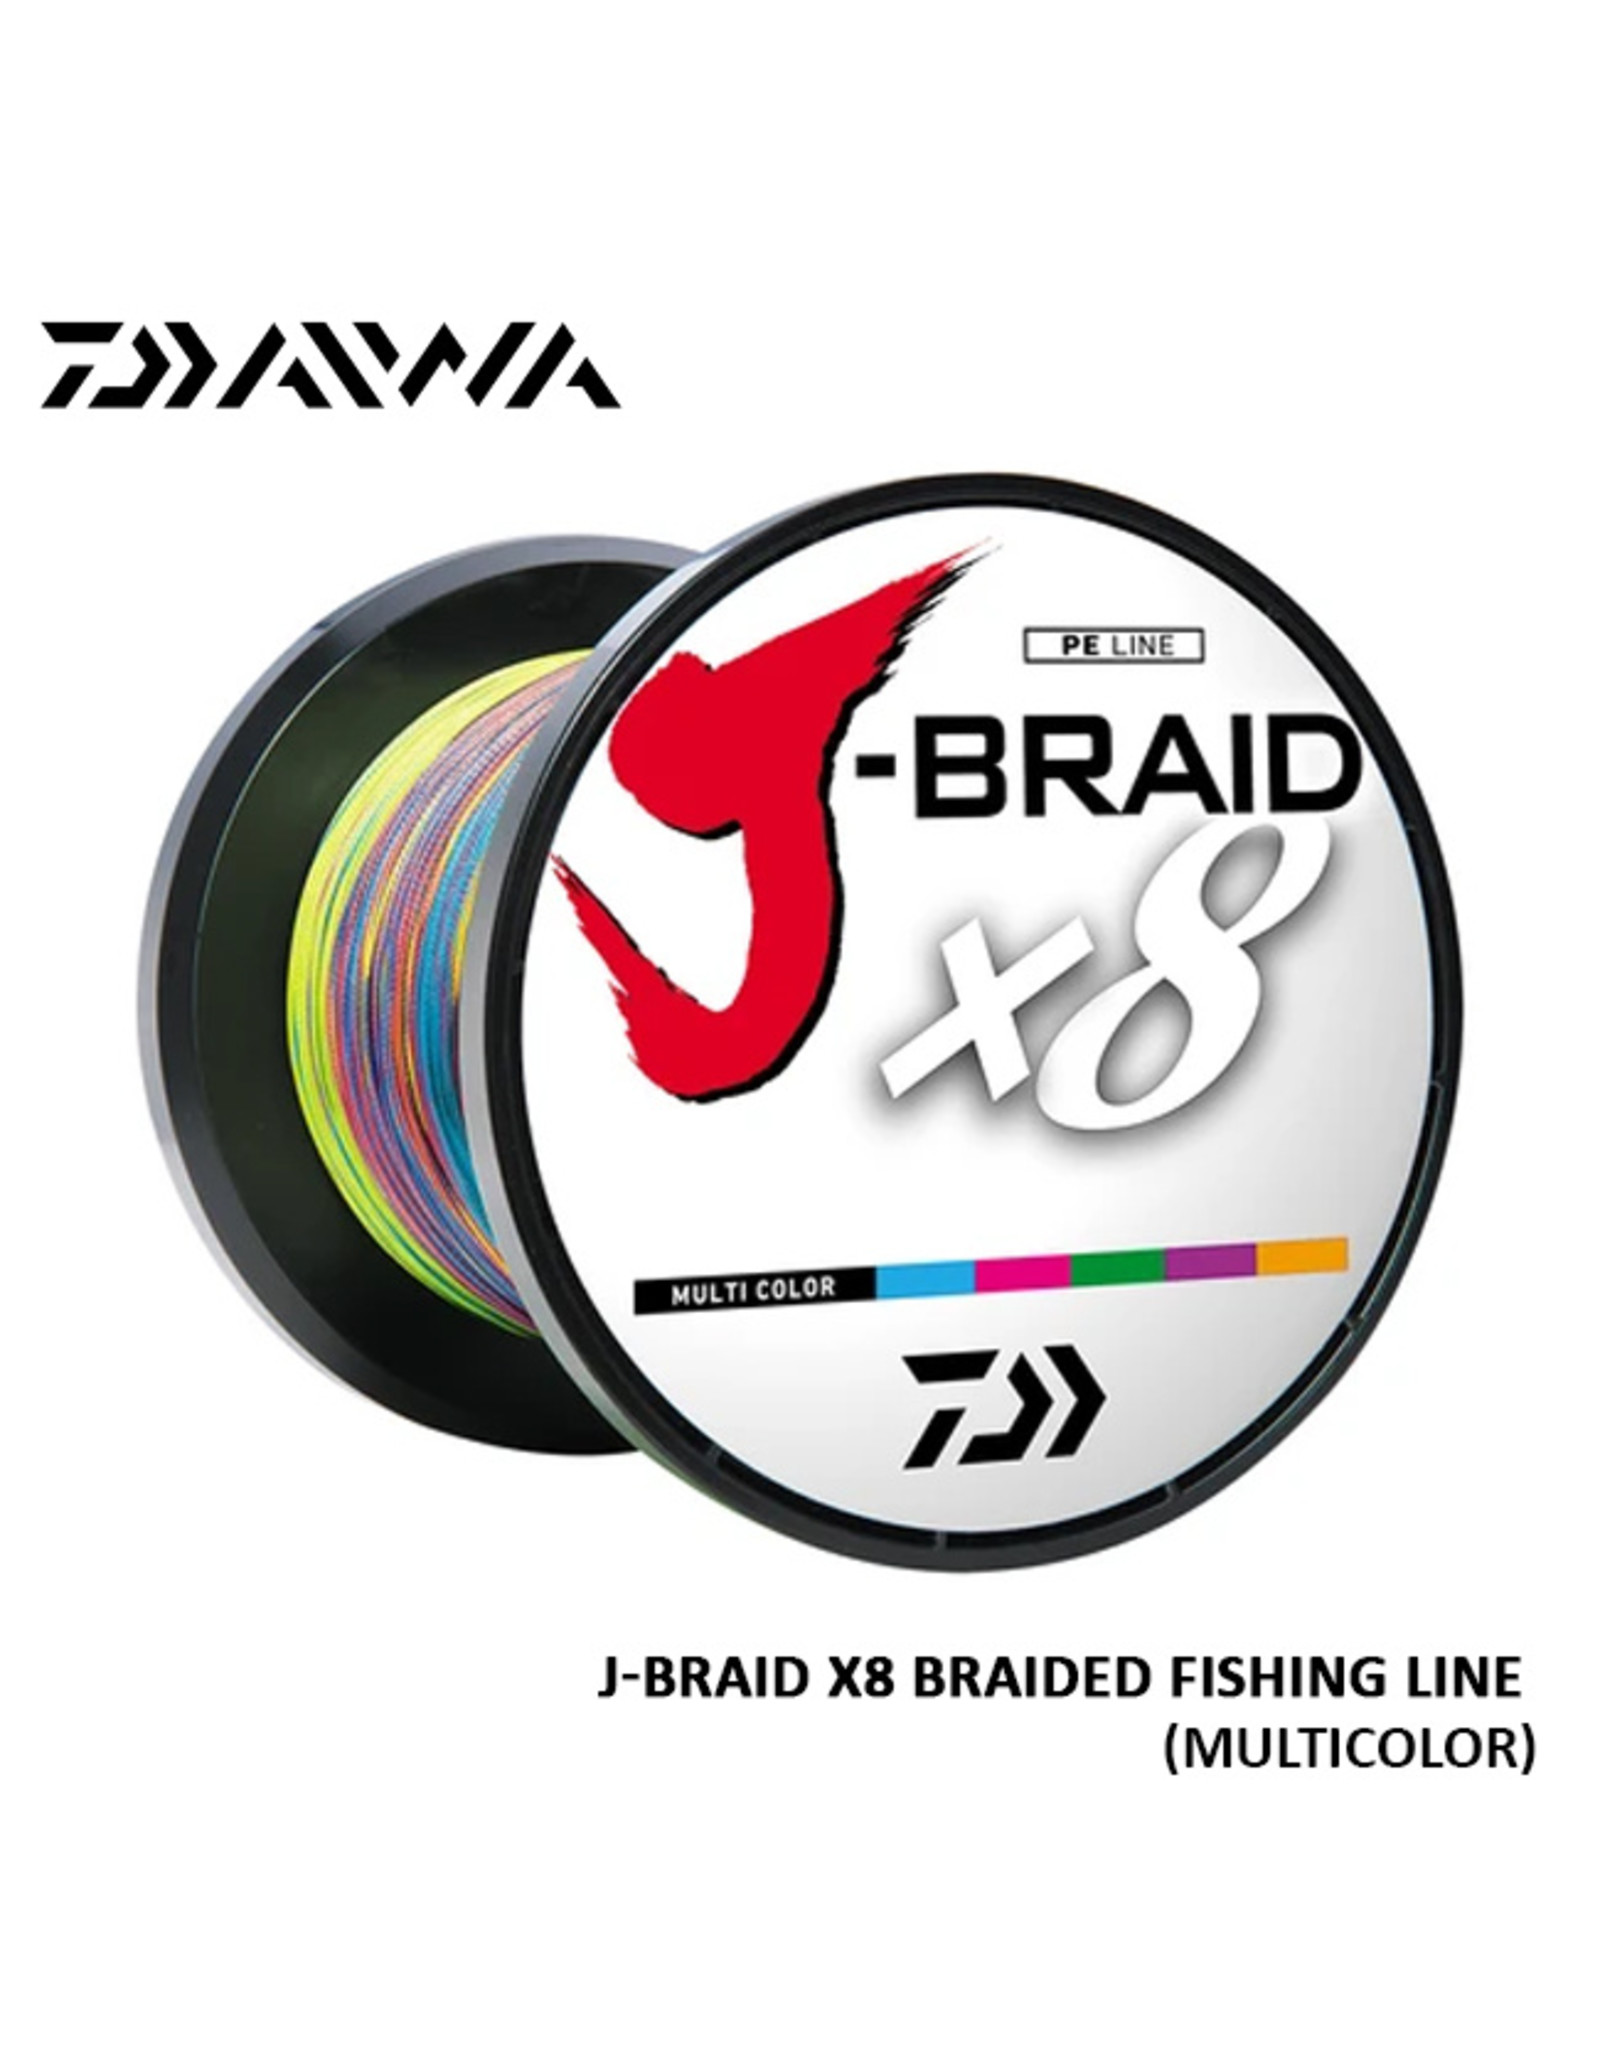 J-BRAIDED MULTICOLOR X8 BRAIDED FISHING LINE, 500 METERS, MULTICOLOR 80  POUNDS - Hele Mai Fishing Supply